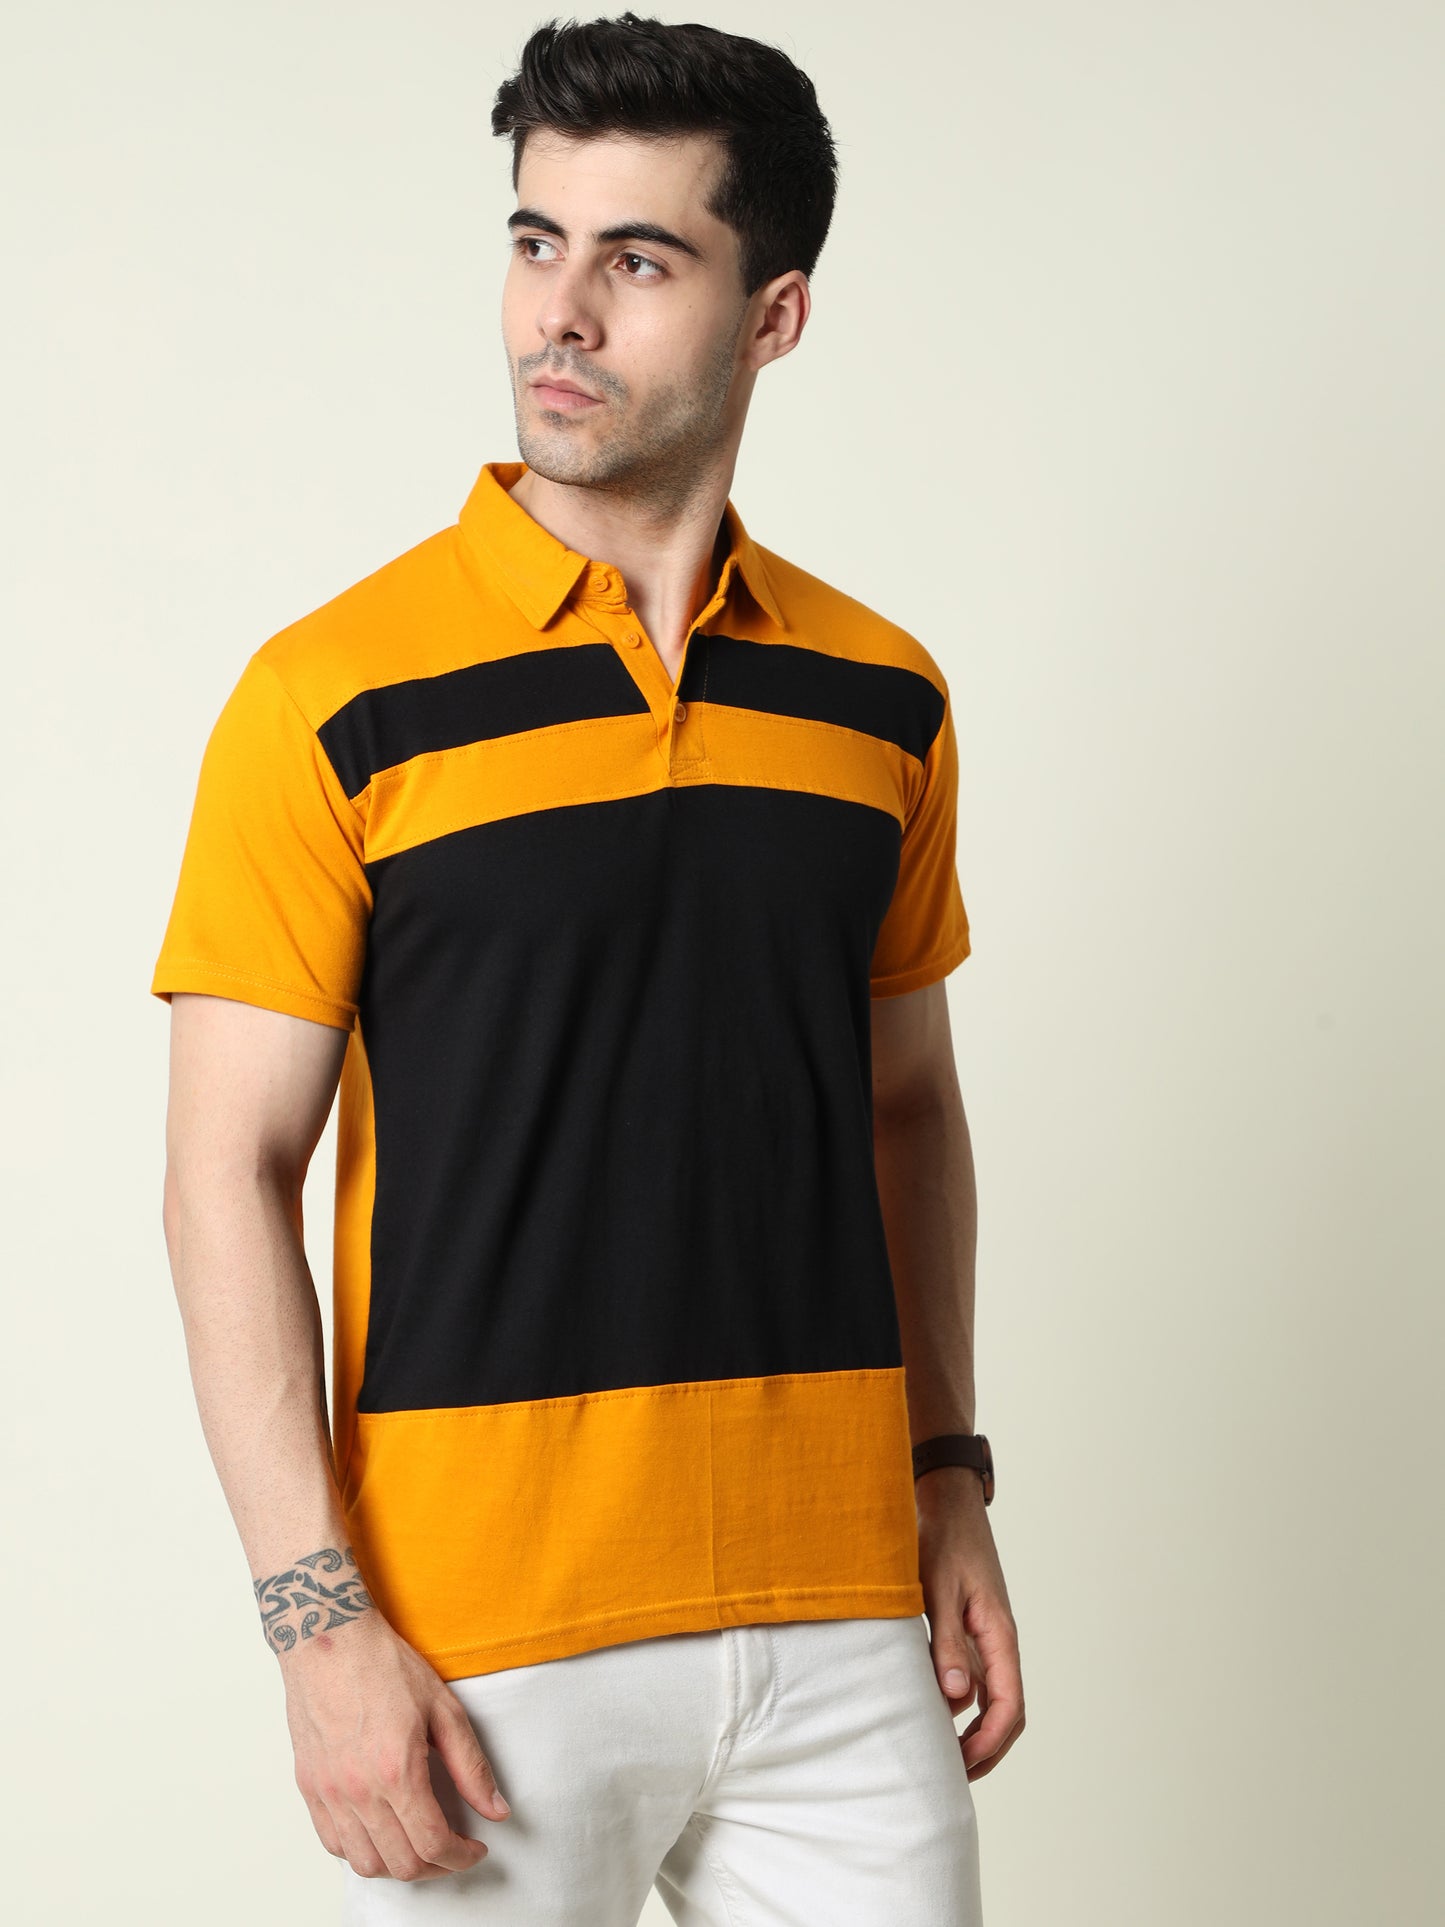 Men's Cotton Polo Neck Color Block Half Sleeve T-Shirt - (Pack of 2)